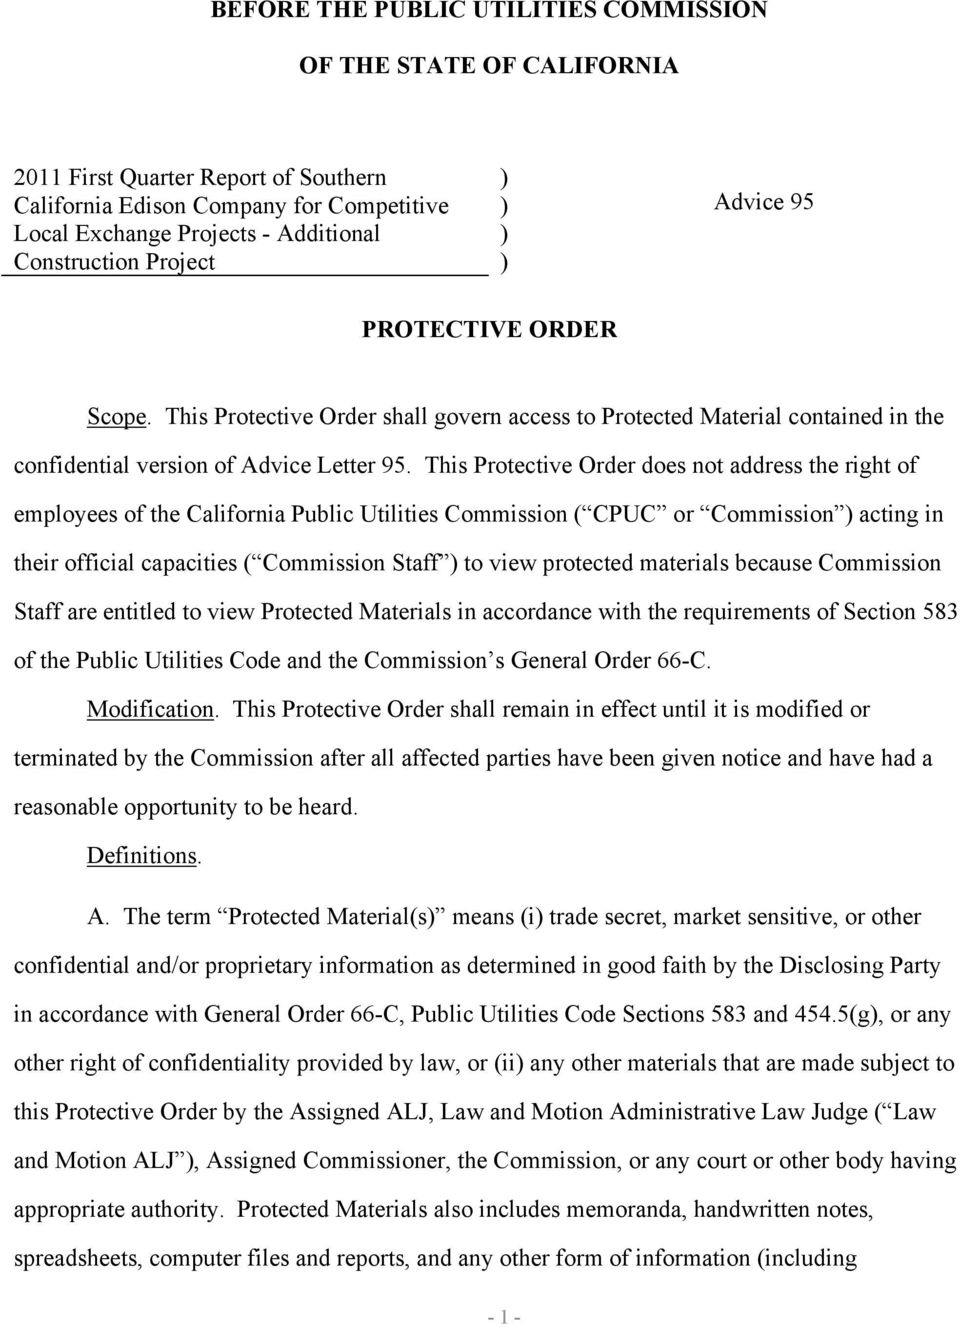 This Protective Order does not address the right of employees of the California Public Utilities Commission ( CPUC or Commission ) acting in their official capacities ( Commission Staff ) to view